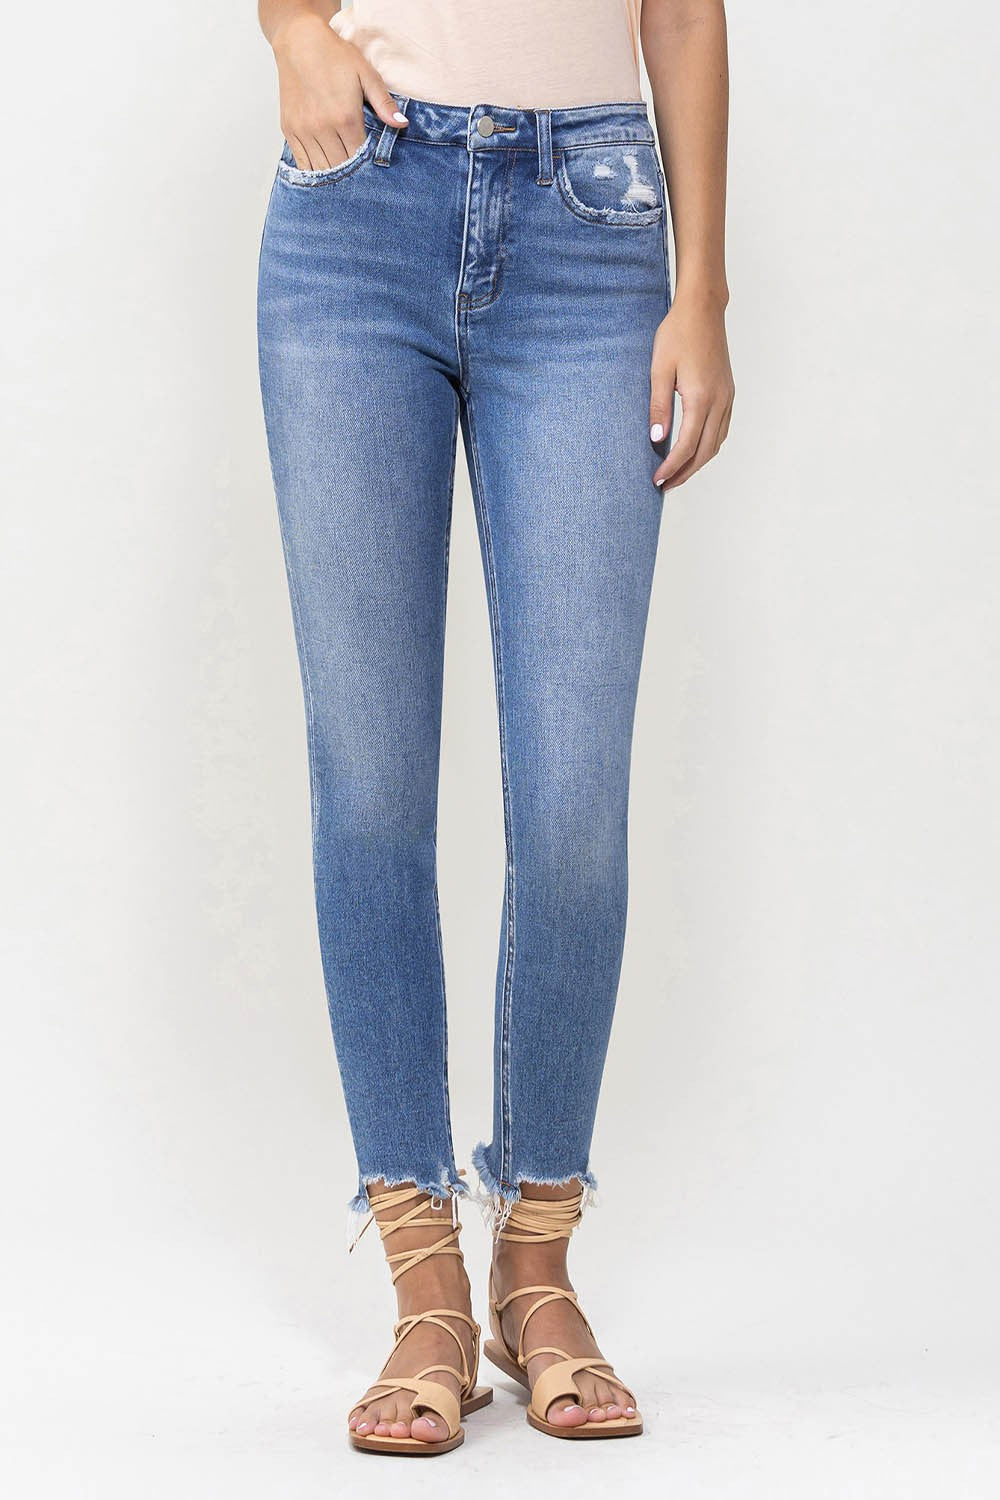 My Only Wish High Rise Crop Skinny Jeans